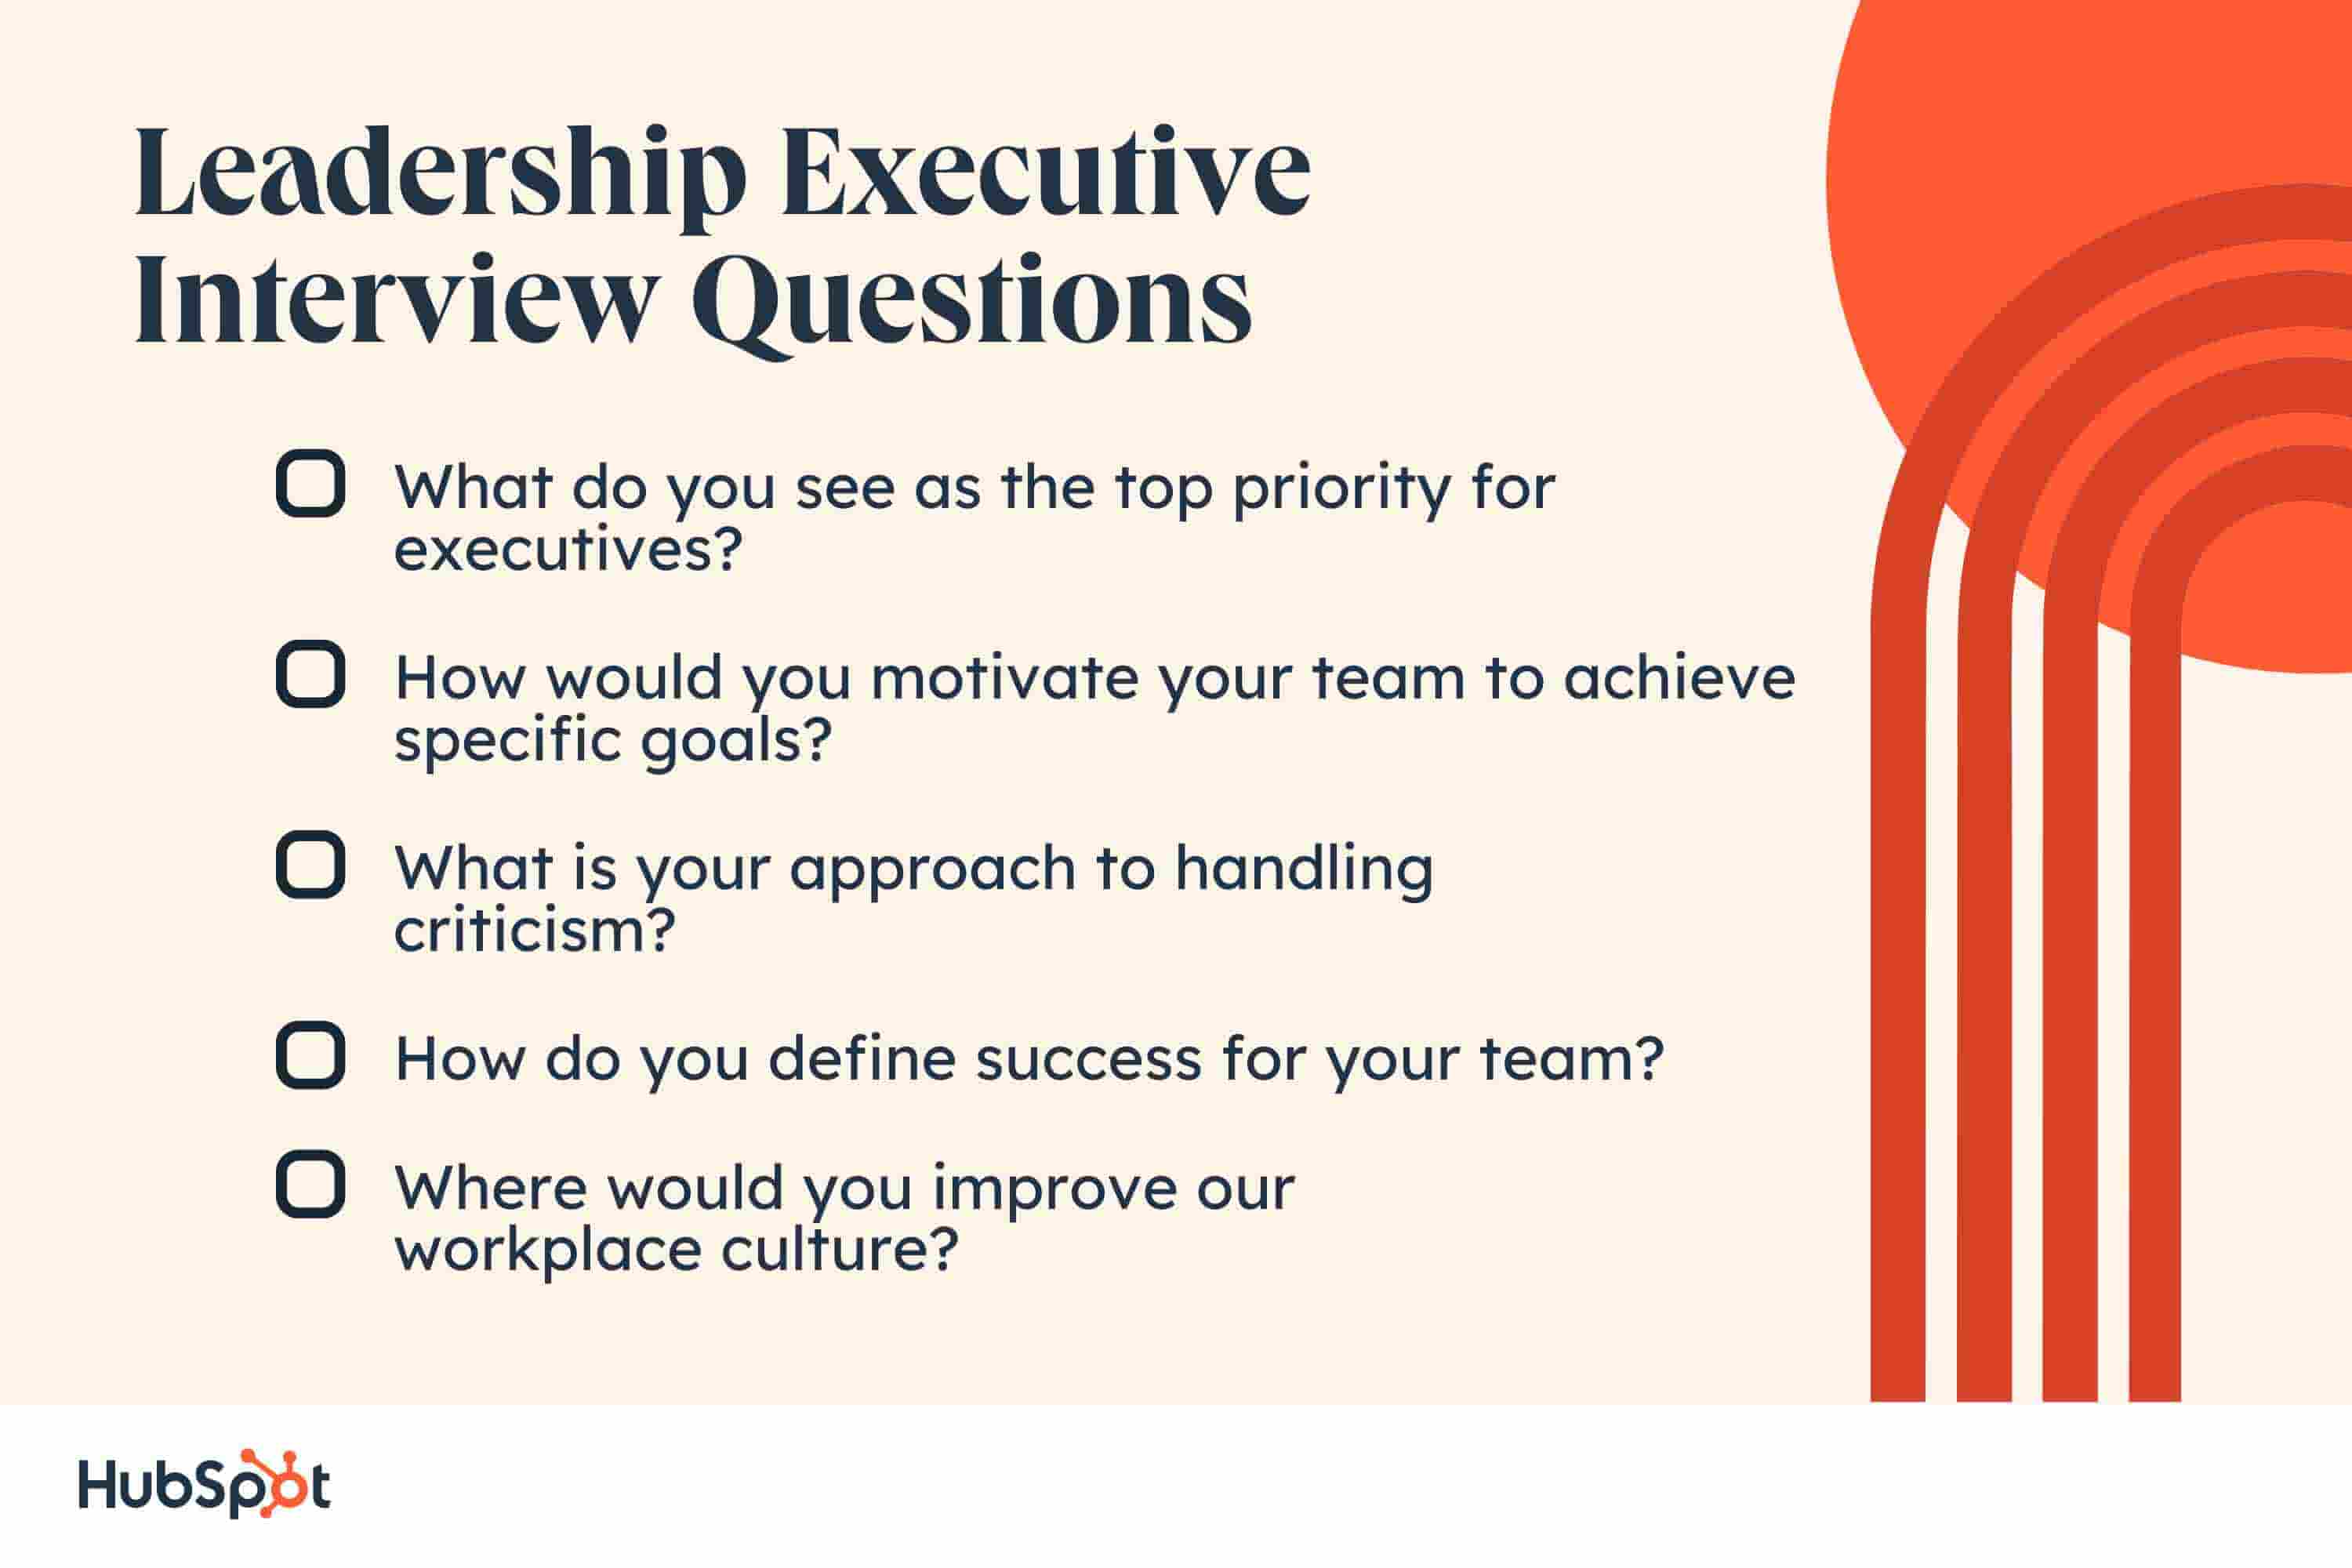 leadership executive interview questions. What do you see as the top priority for executives? How would you motivate your team to achieve specific goals? What is your approach to handling criticism? How do you define success for your team? Where would you improve our workplace culture?